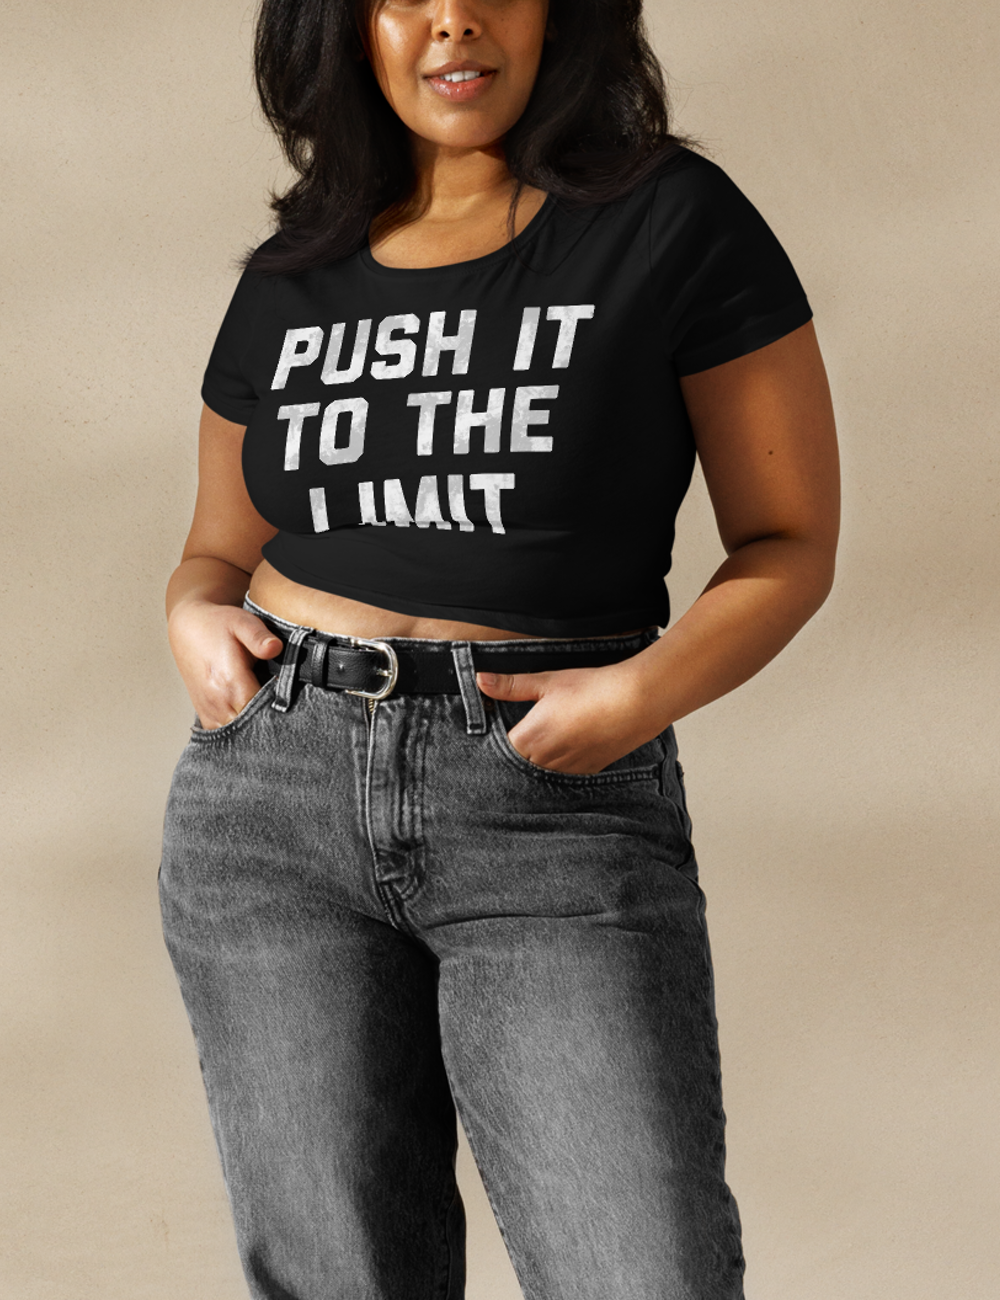 Push It To The Limit Women's Fitted Crop Top T-Shirt OniTakai